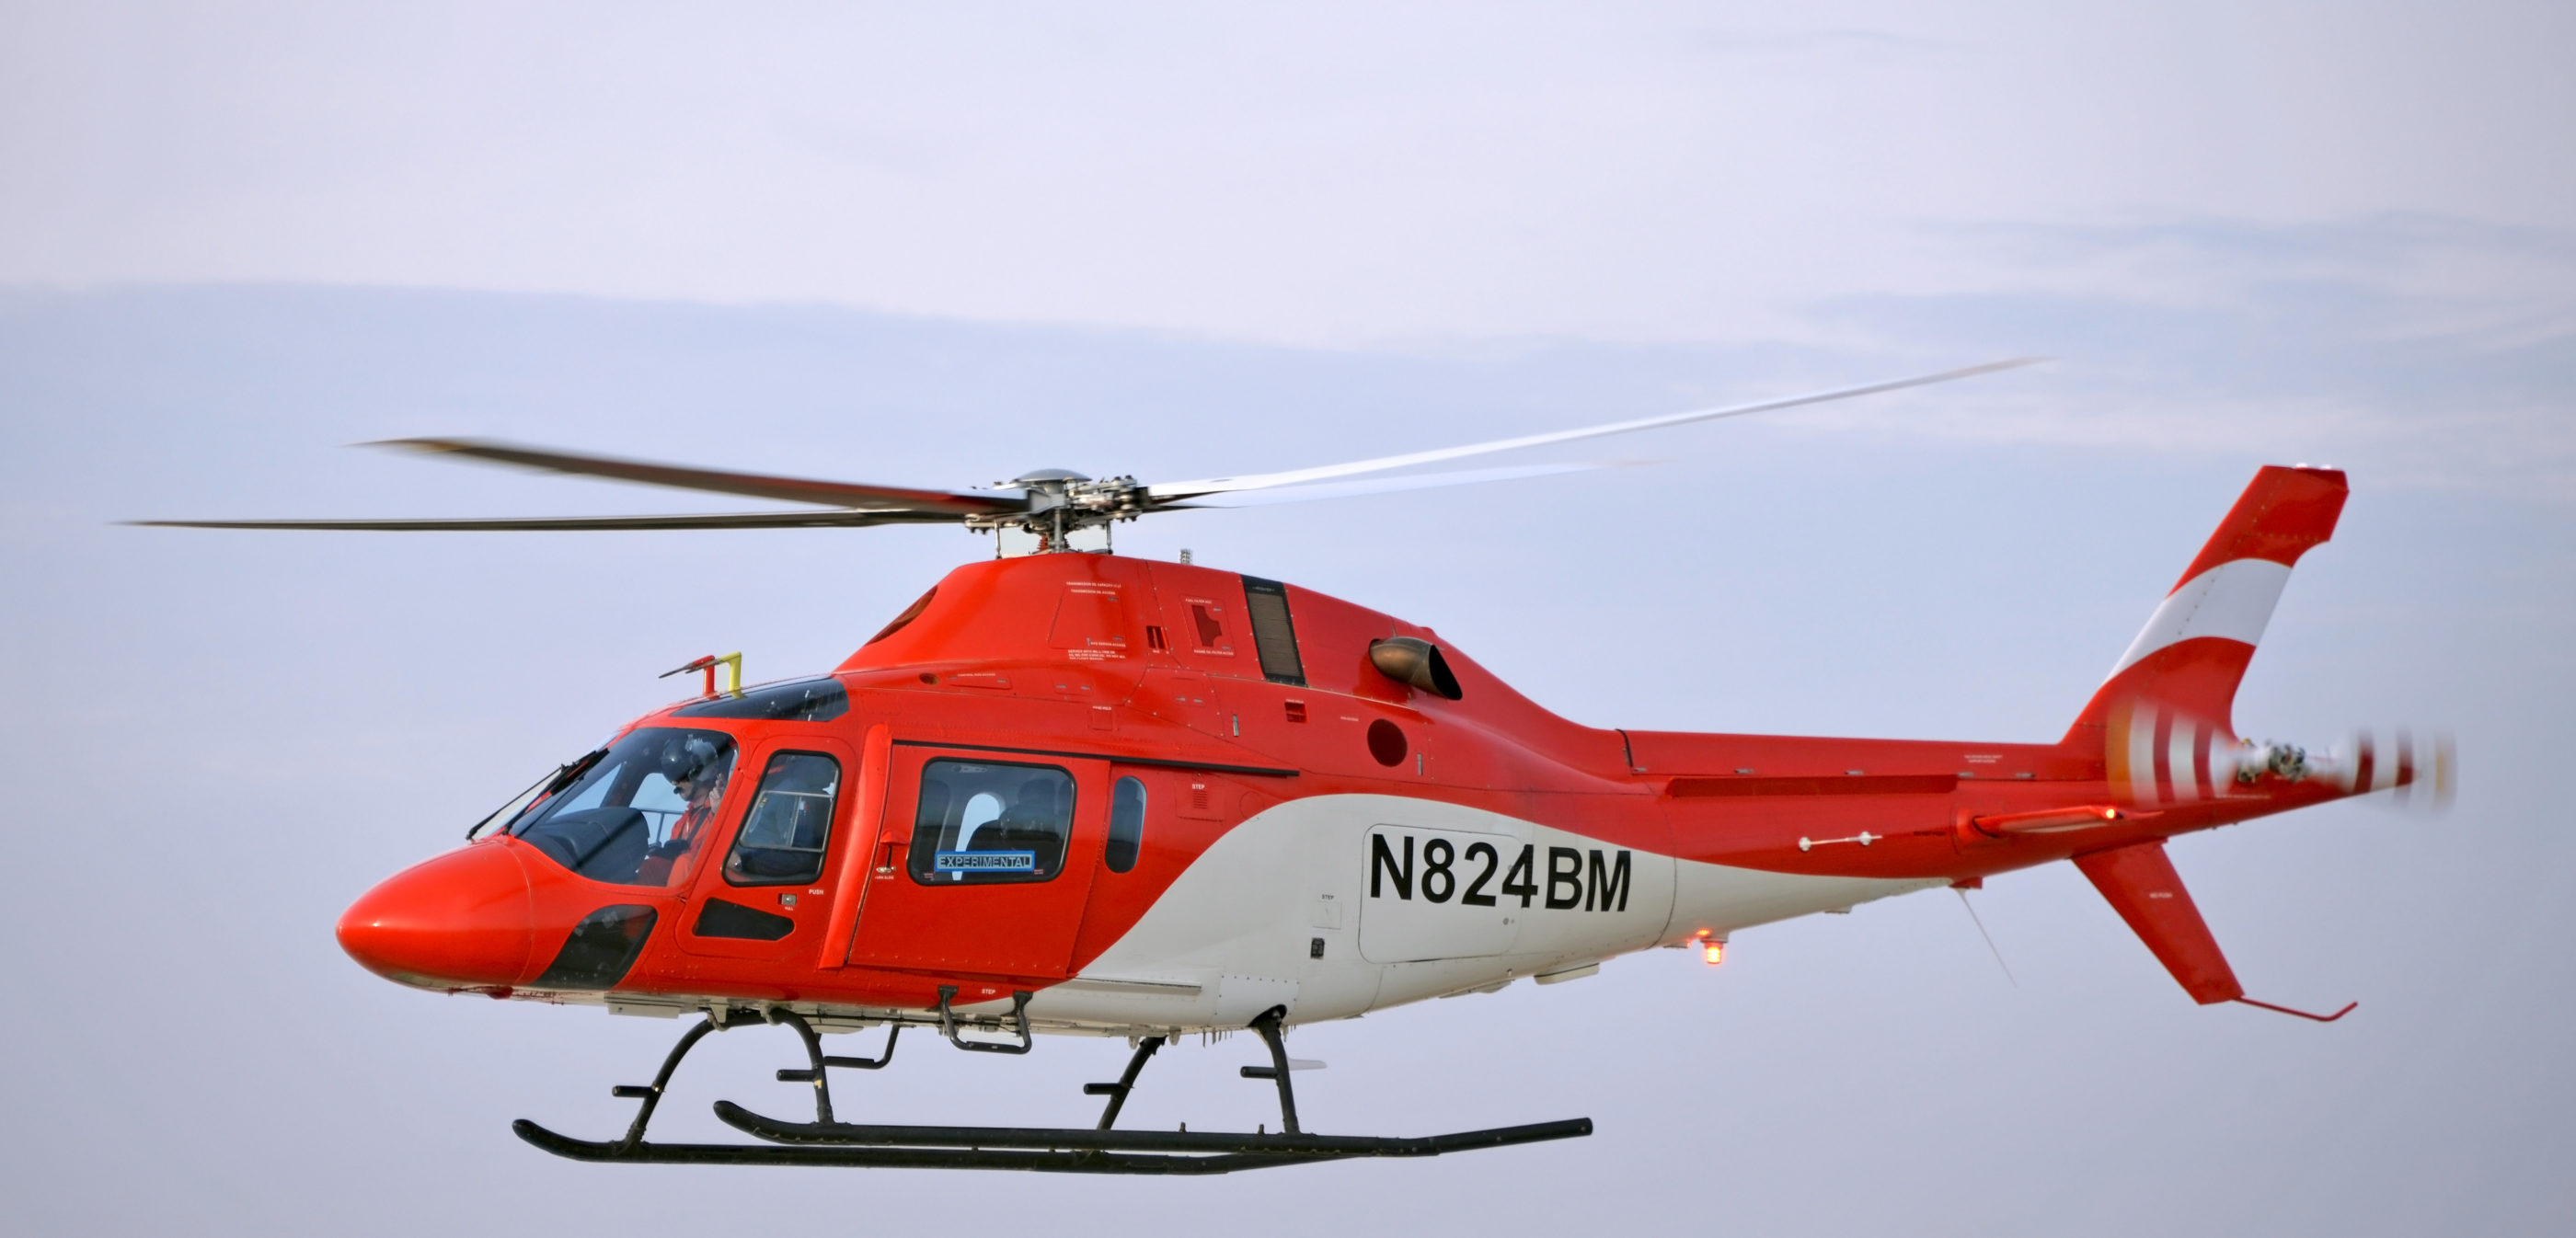 The TH-119, based on the AW119, is Leonardo’s offer to replace the U.S. Navy’s TH-57 training helicopter fleet. Leonardo Photo